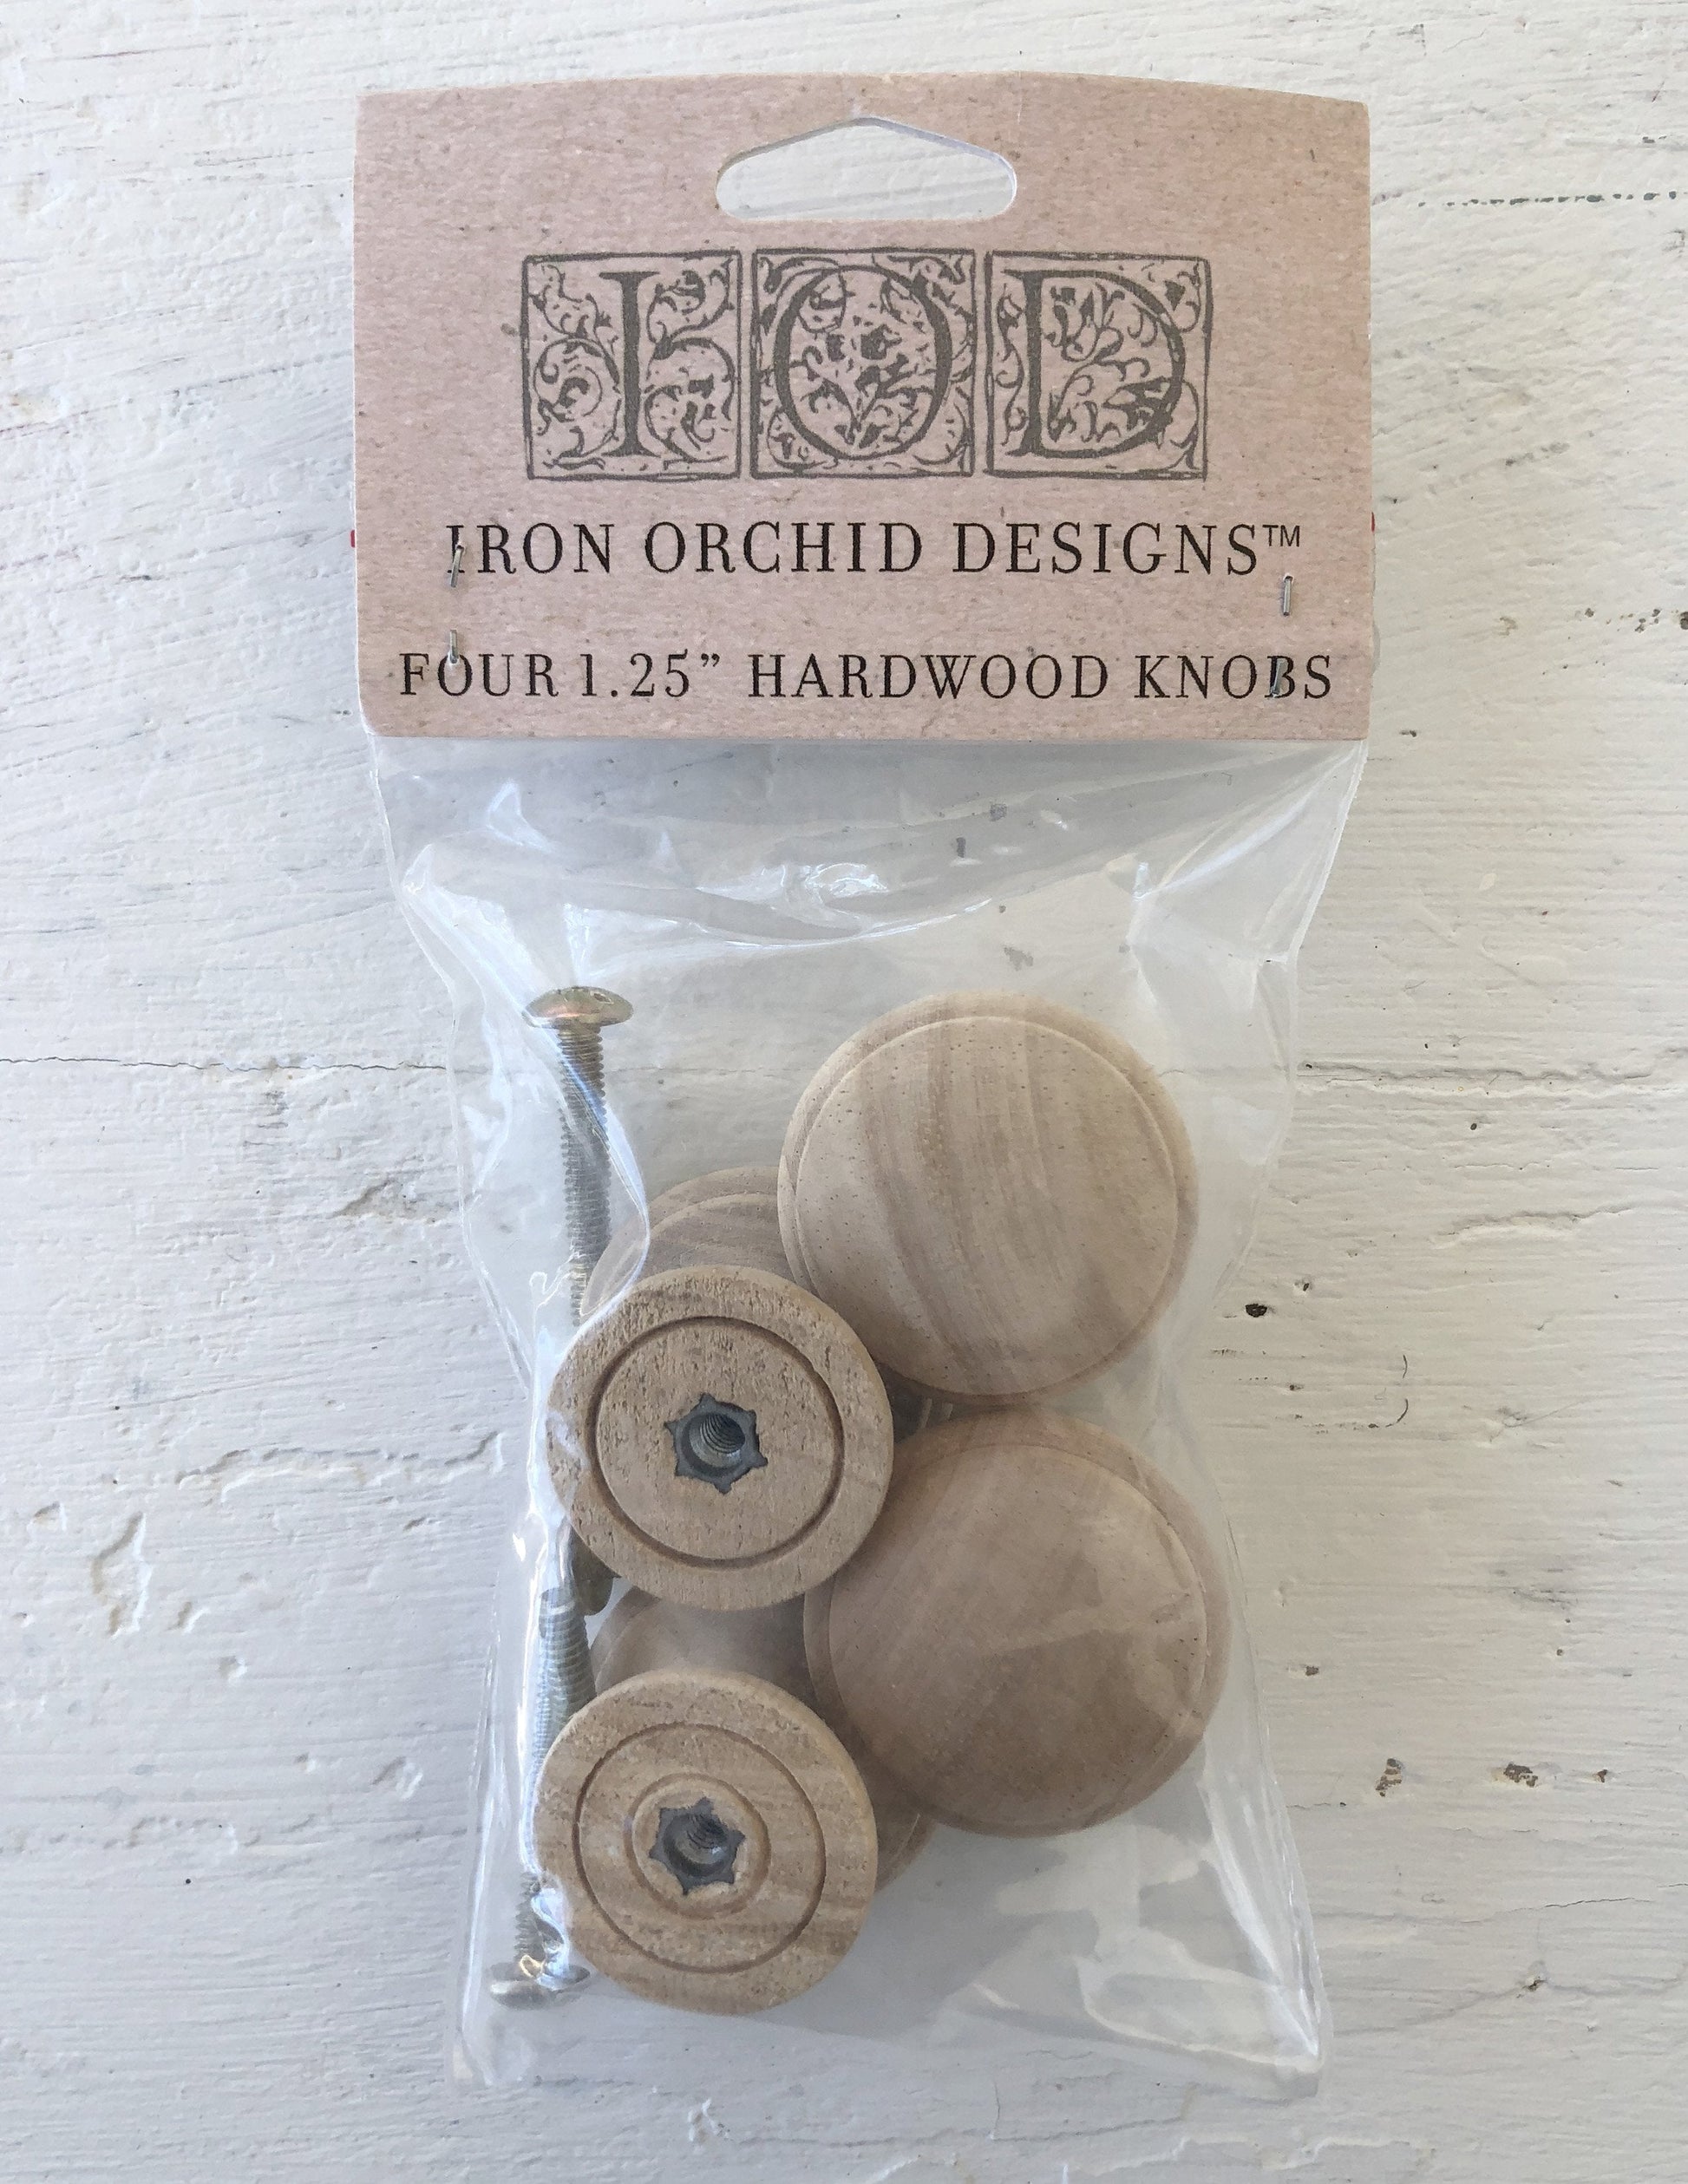 IOD Wooden Knobs 1.25 4 pack IOD hardwood knobs are a little different than the commonly available wooden knobs. Sure, they will work great for that simple pine dresser, but they work equally well on your more sophisticated pieces. Threaded insert and precision screw for easy and accurate mountingElegant profile design for wider applications than most wooden knobsHardwood and subtle grain for best use with paint, stain and all your stamping applications